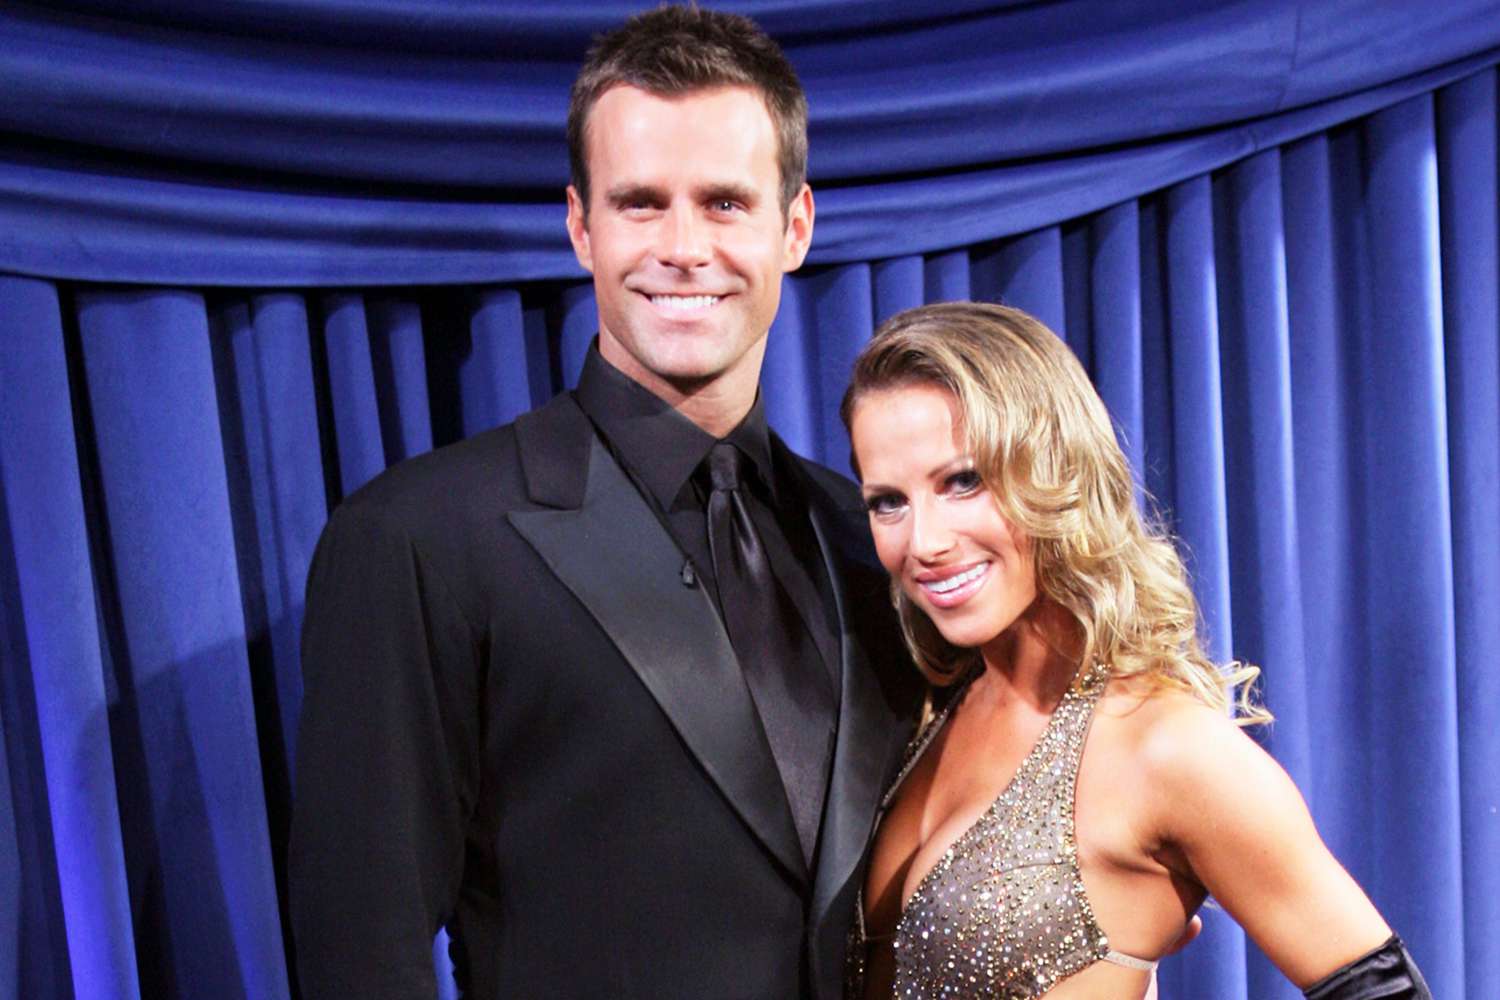 Cameron Mathison Reveals He Asked for a Different Partner When Paired with Edyta Śliwińska on 'Dancing With the Stars'